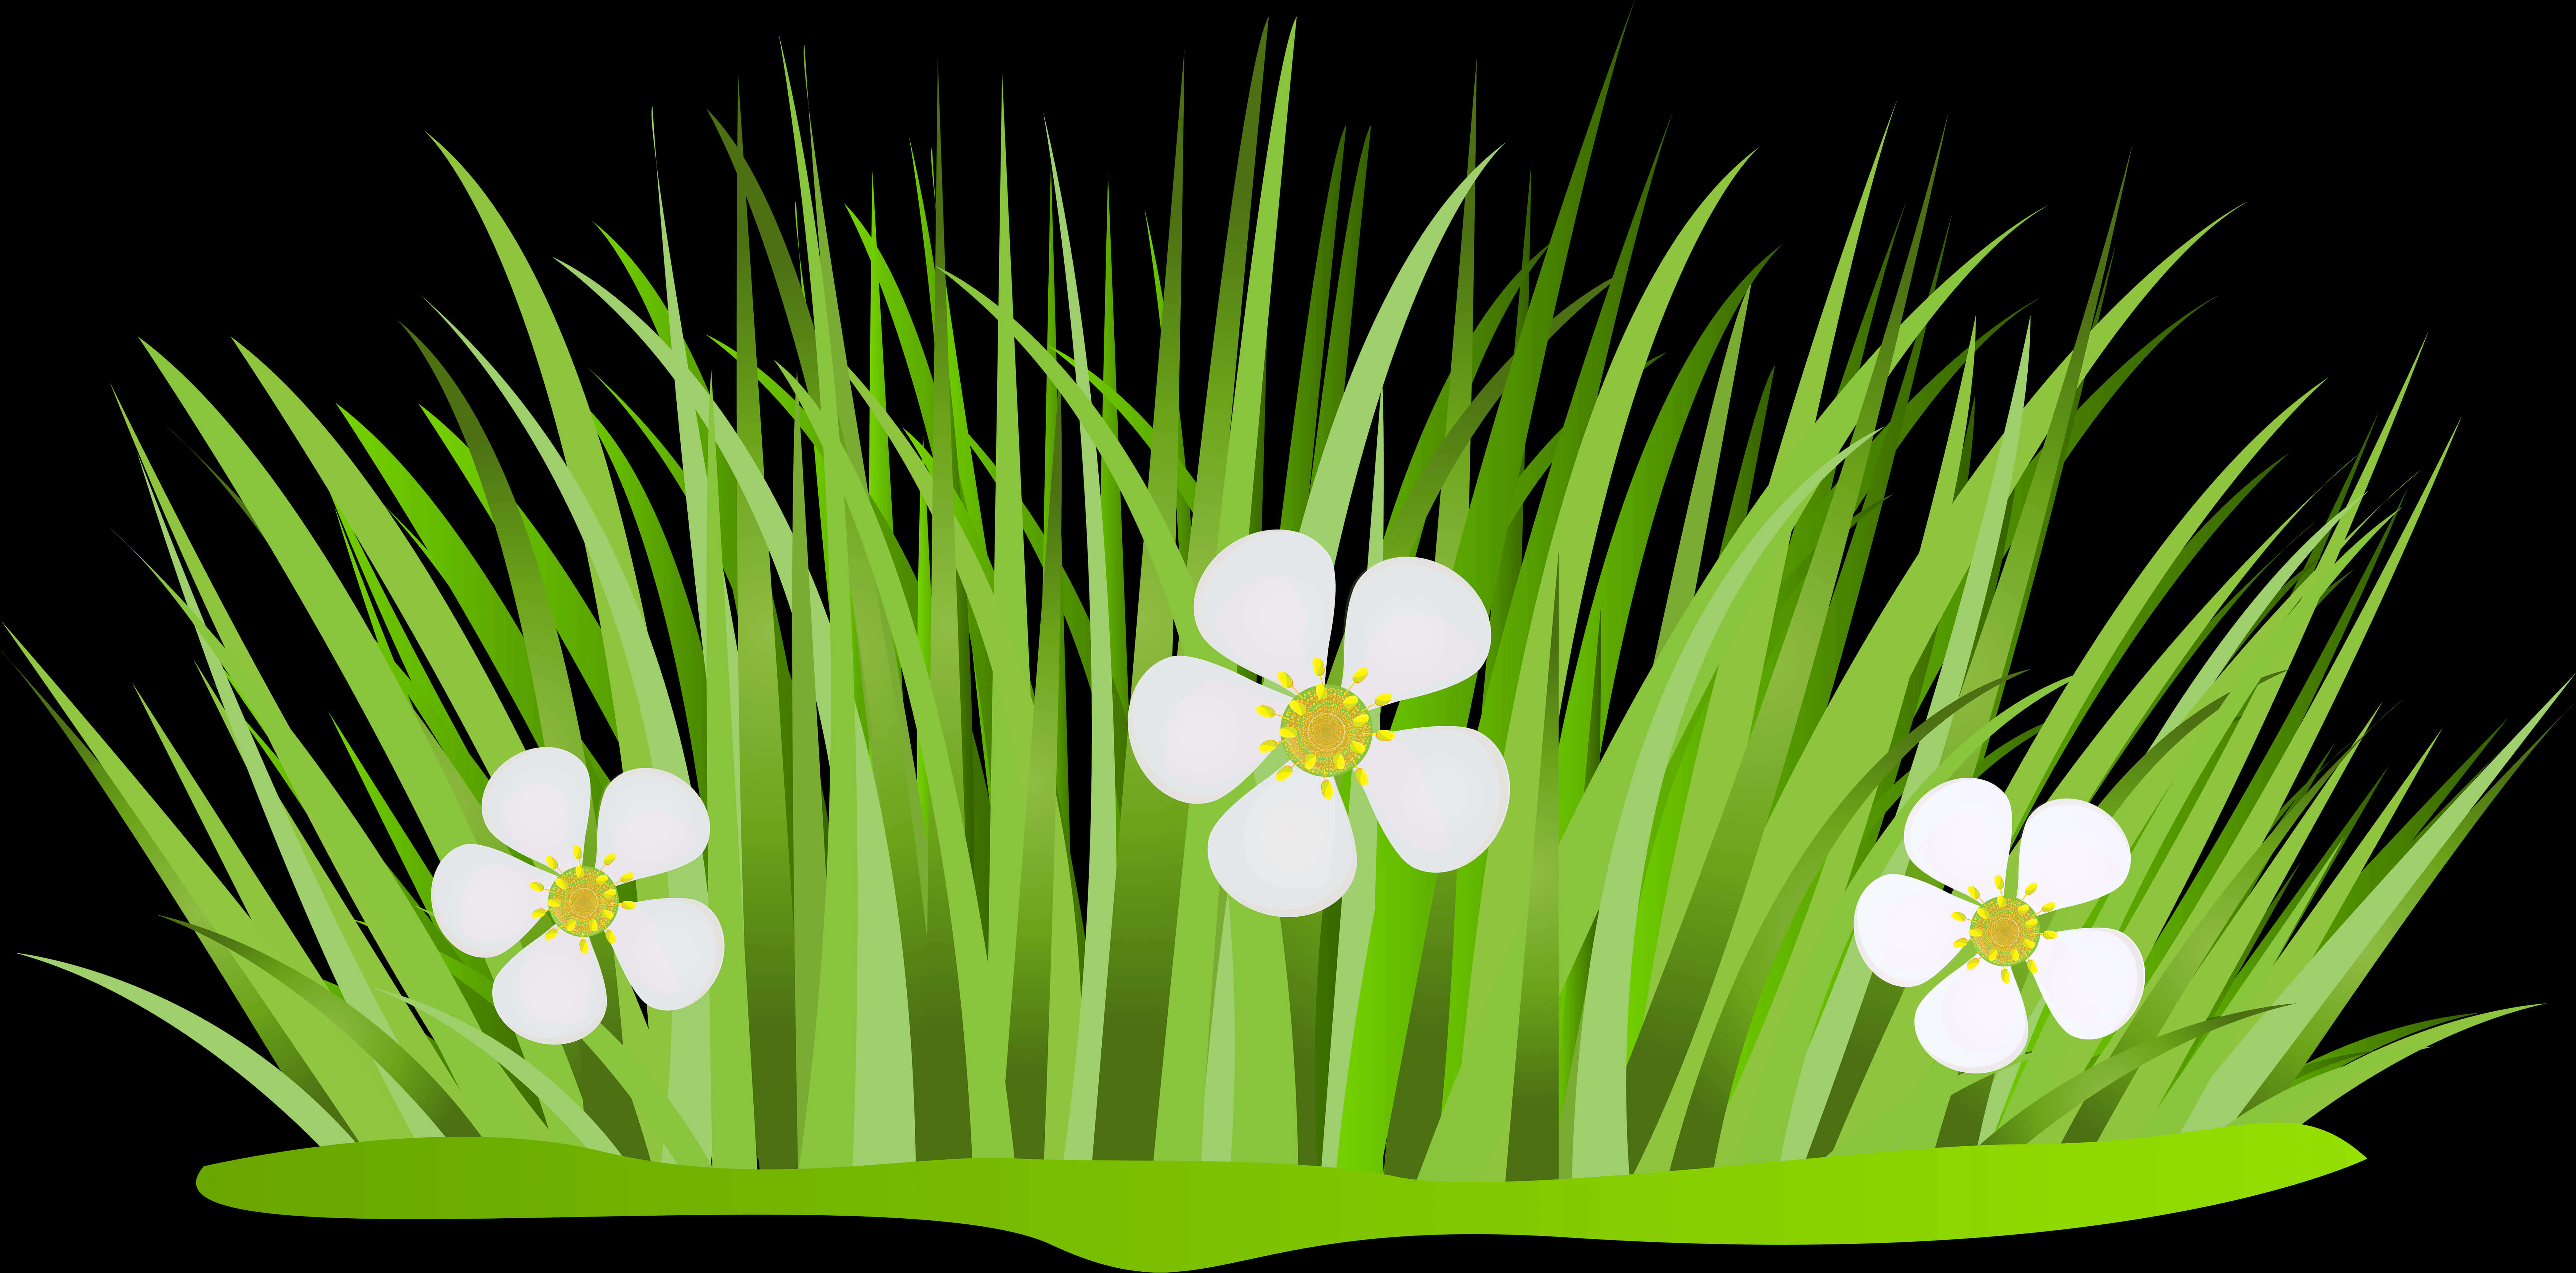 Grass Clip Art With Flowers